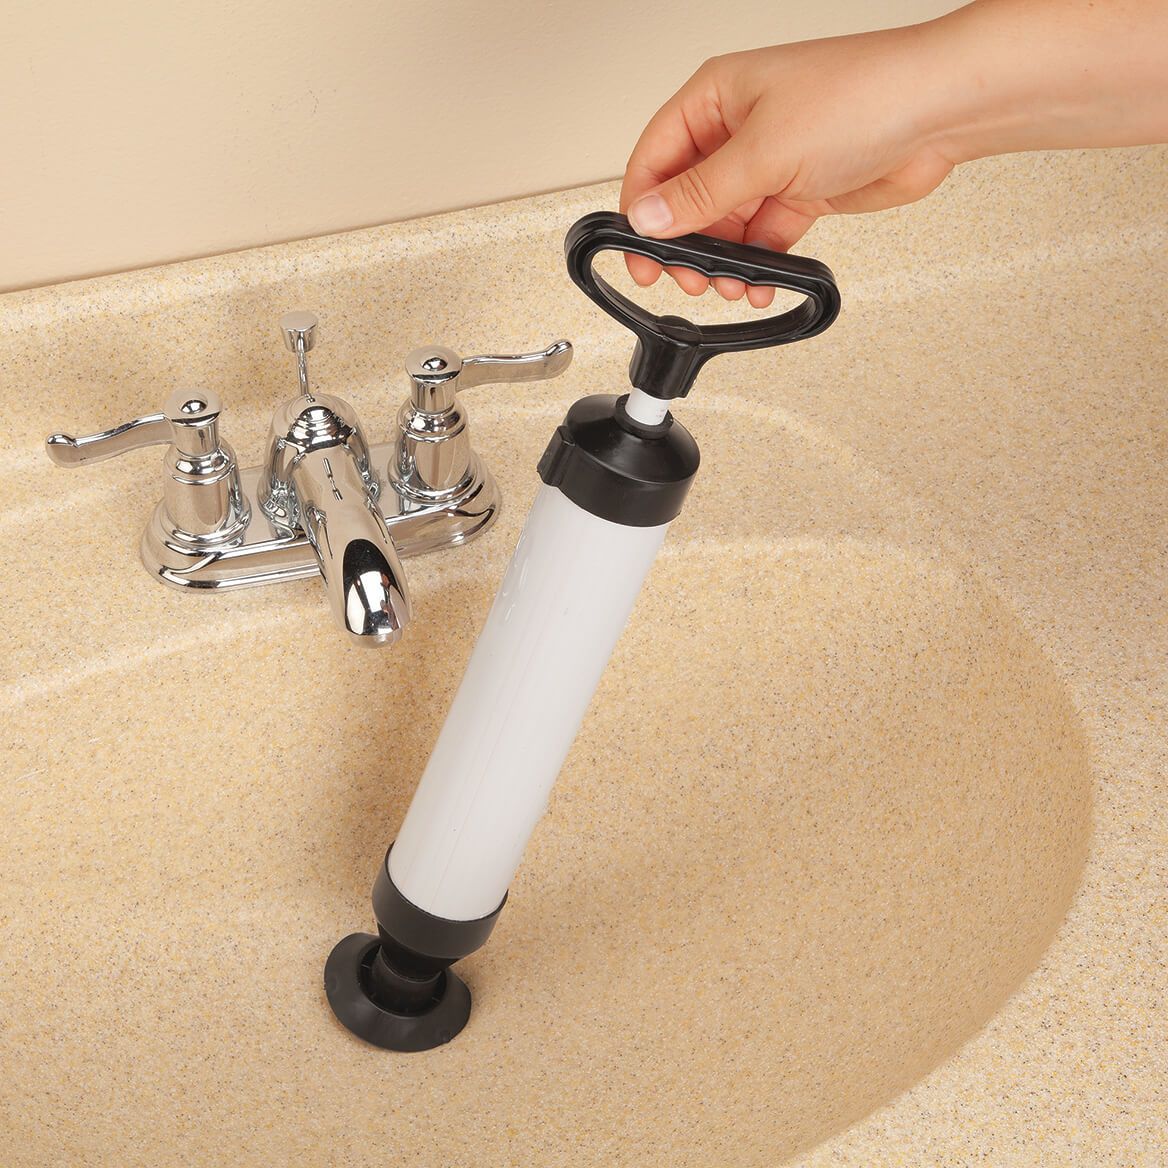 Drain Buster Plunger By LivingSURE™ + '-' + 376559